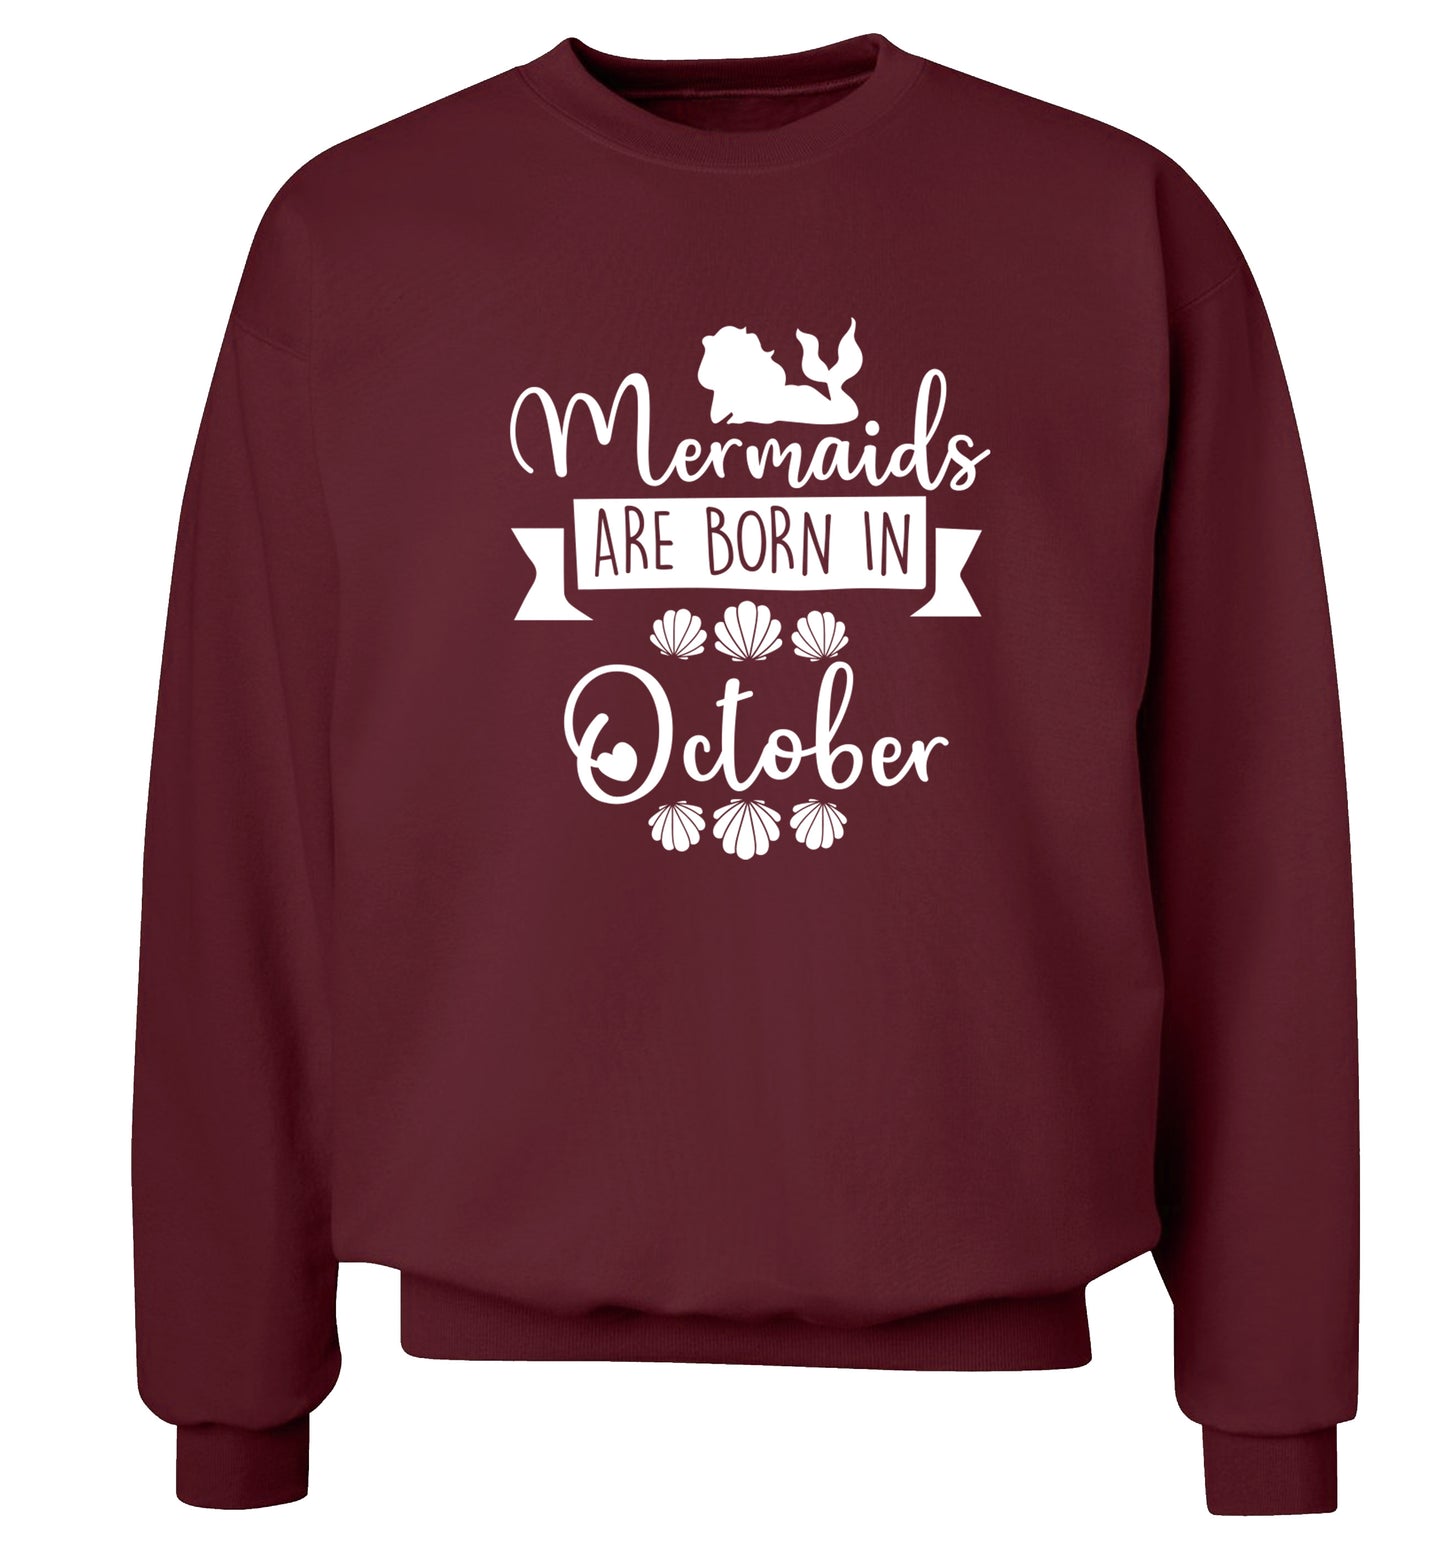 Mermaids are born in October Adult's unisex maroon Sweater 2XL